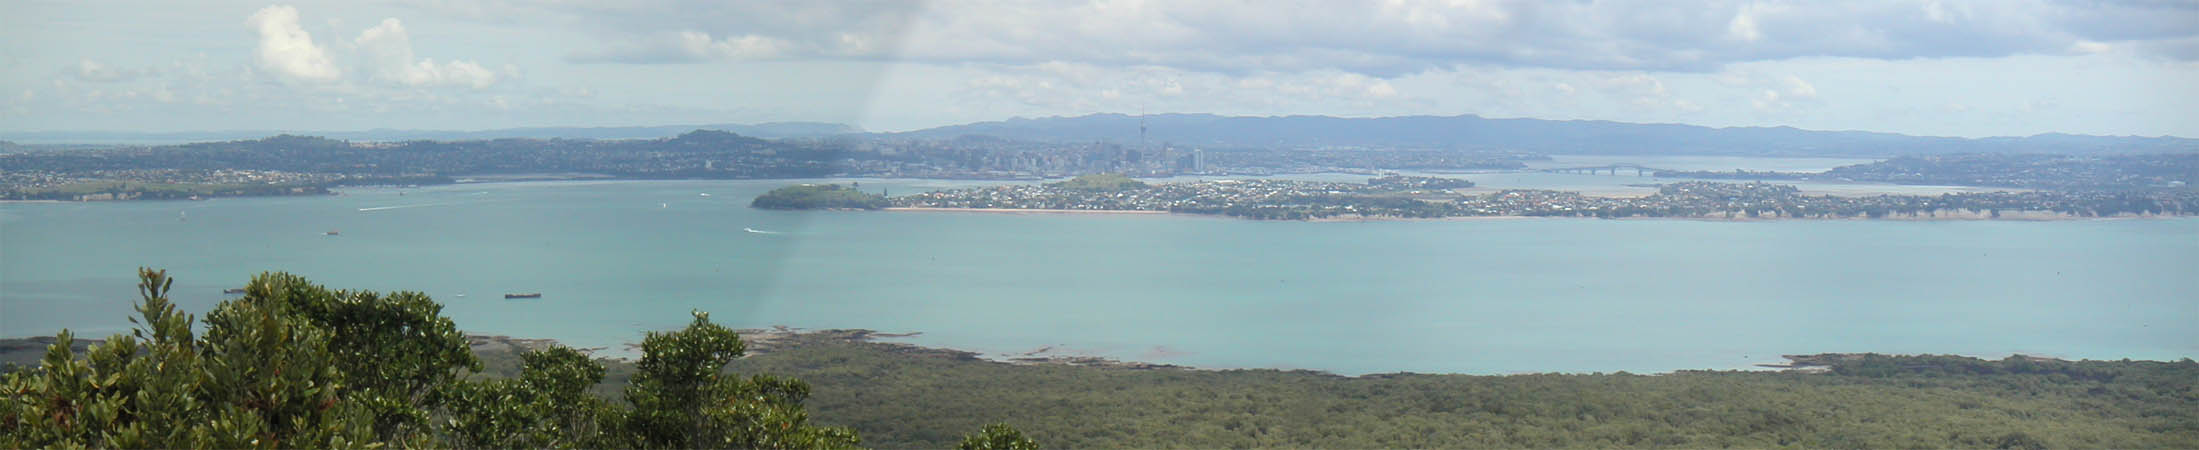 Panorama looking out over Auckland